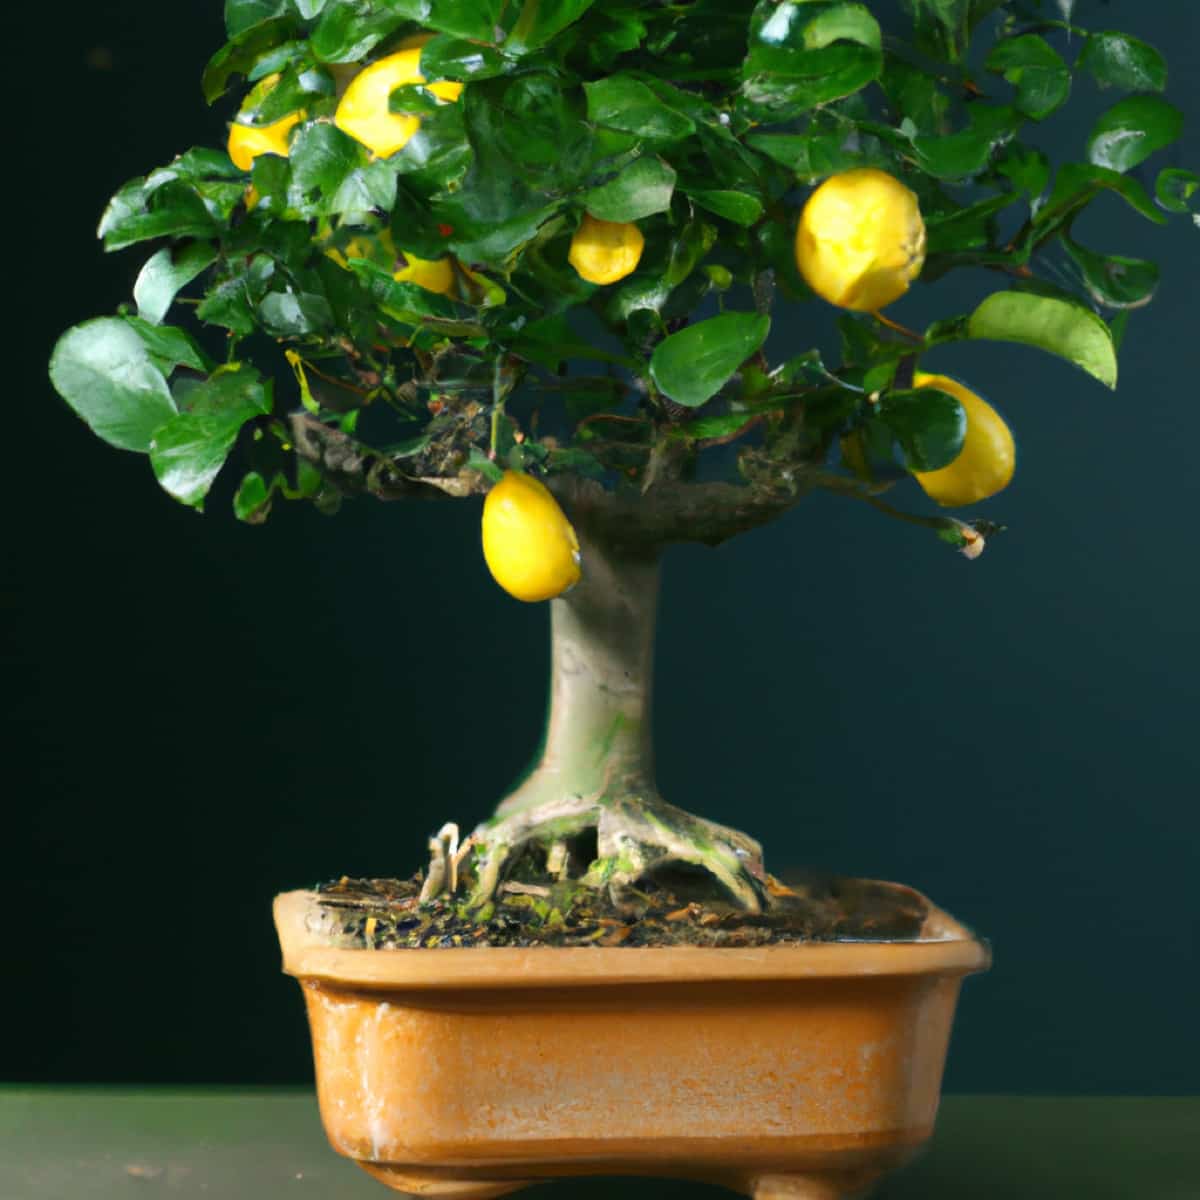 How to Grow and Care for Lemon Bonsai